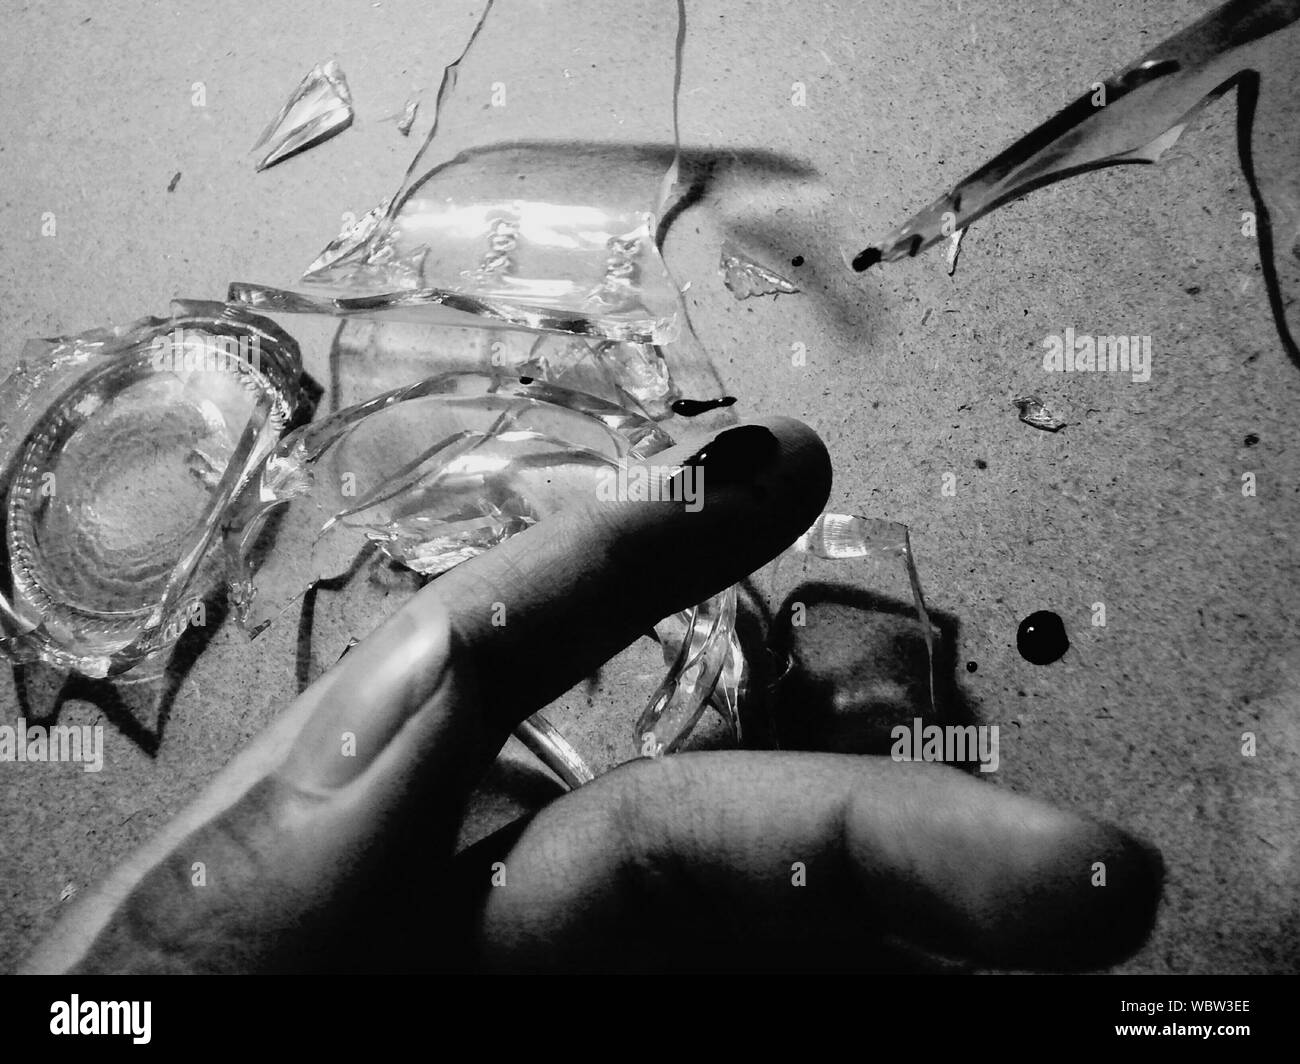 Cropped Image Of Hand With Blood Against Broken Glass On Floor Stock Photo  - Alamy